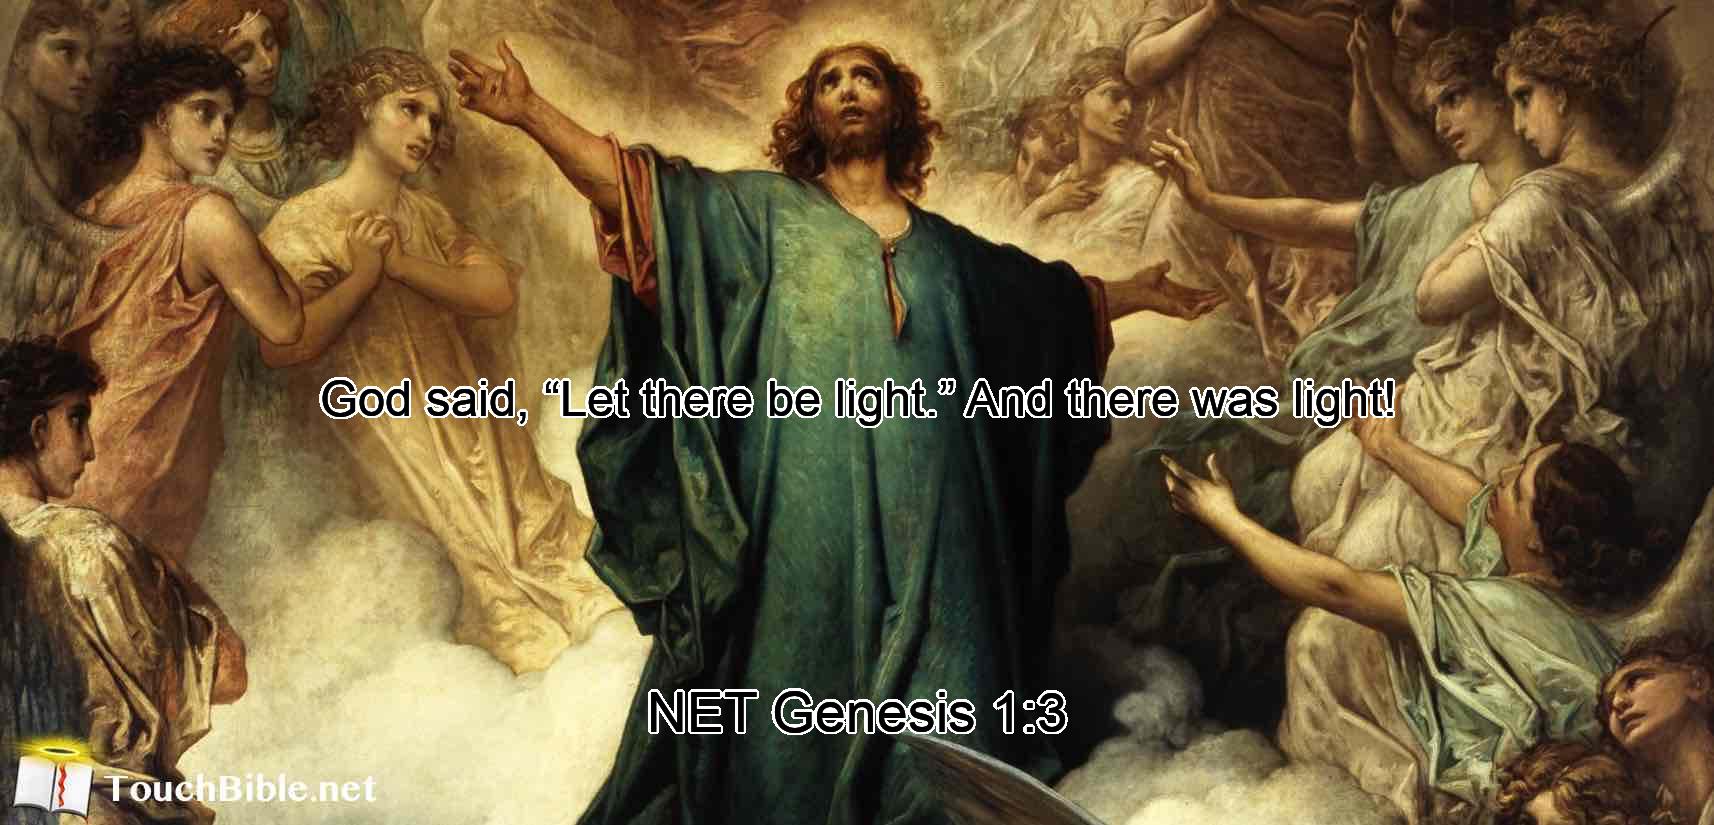 God said,  “Let there be  light.”  And there was light!